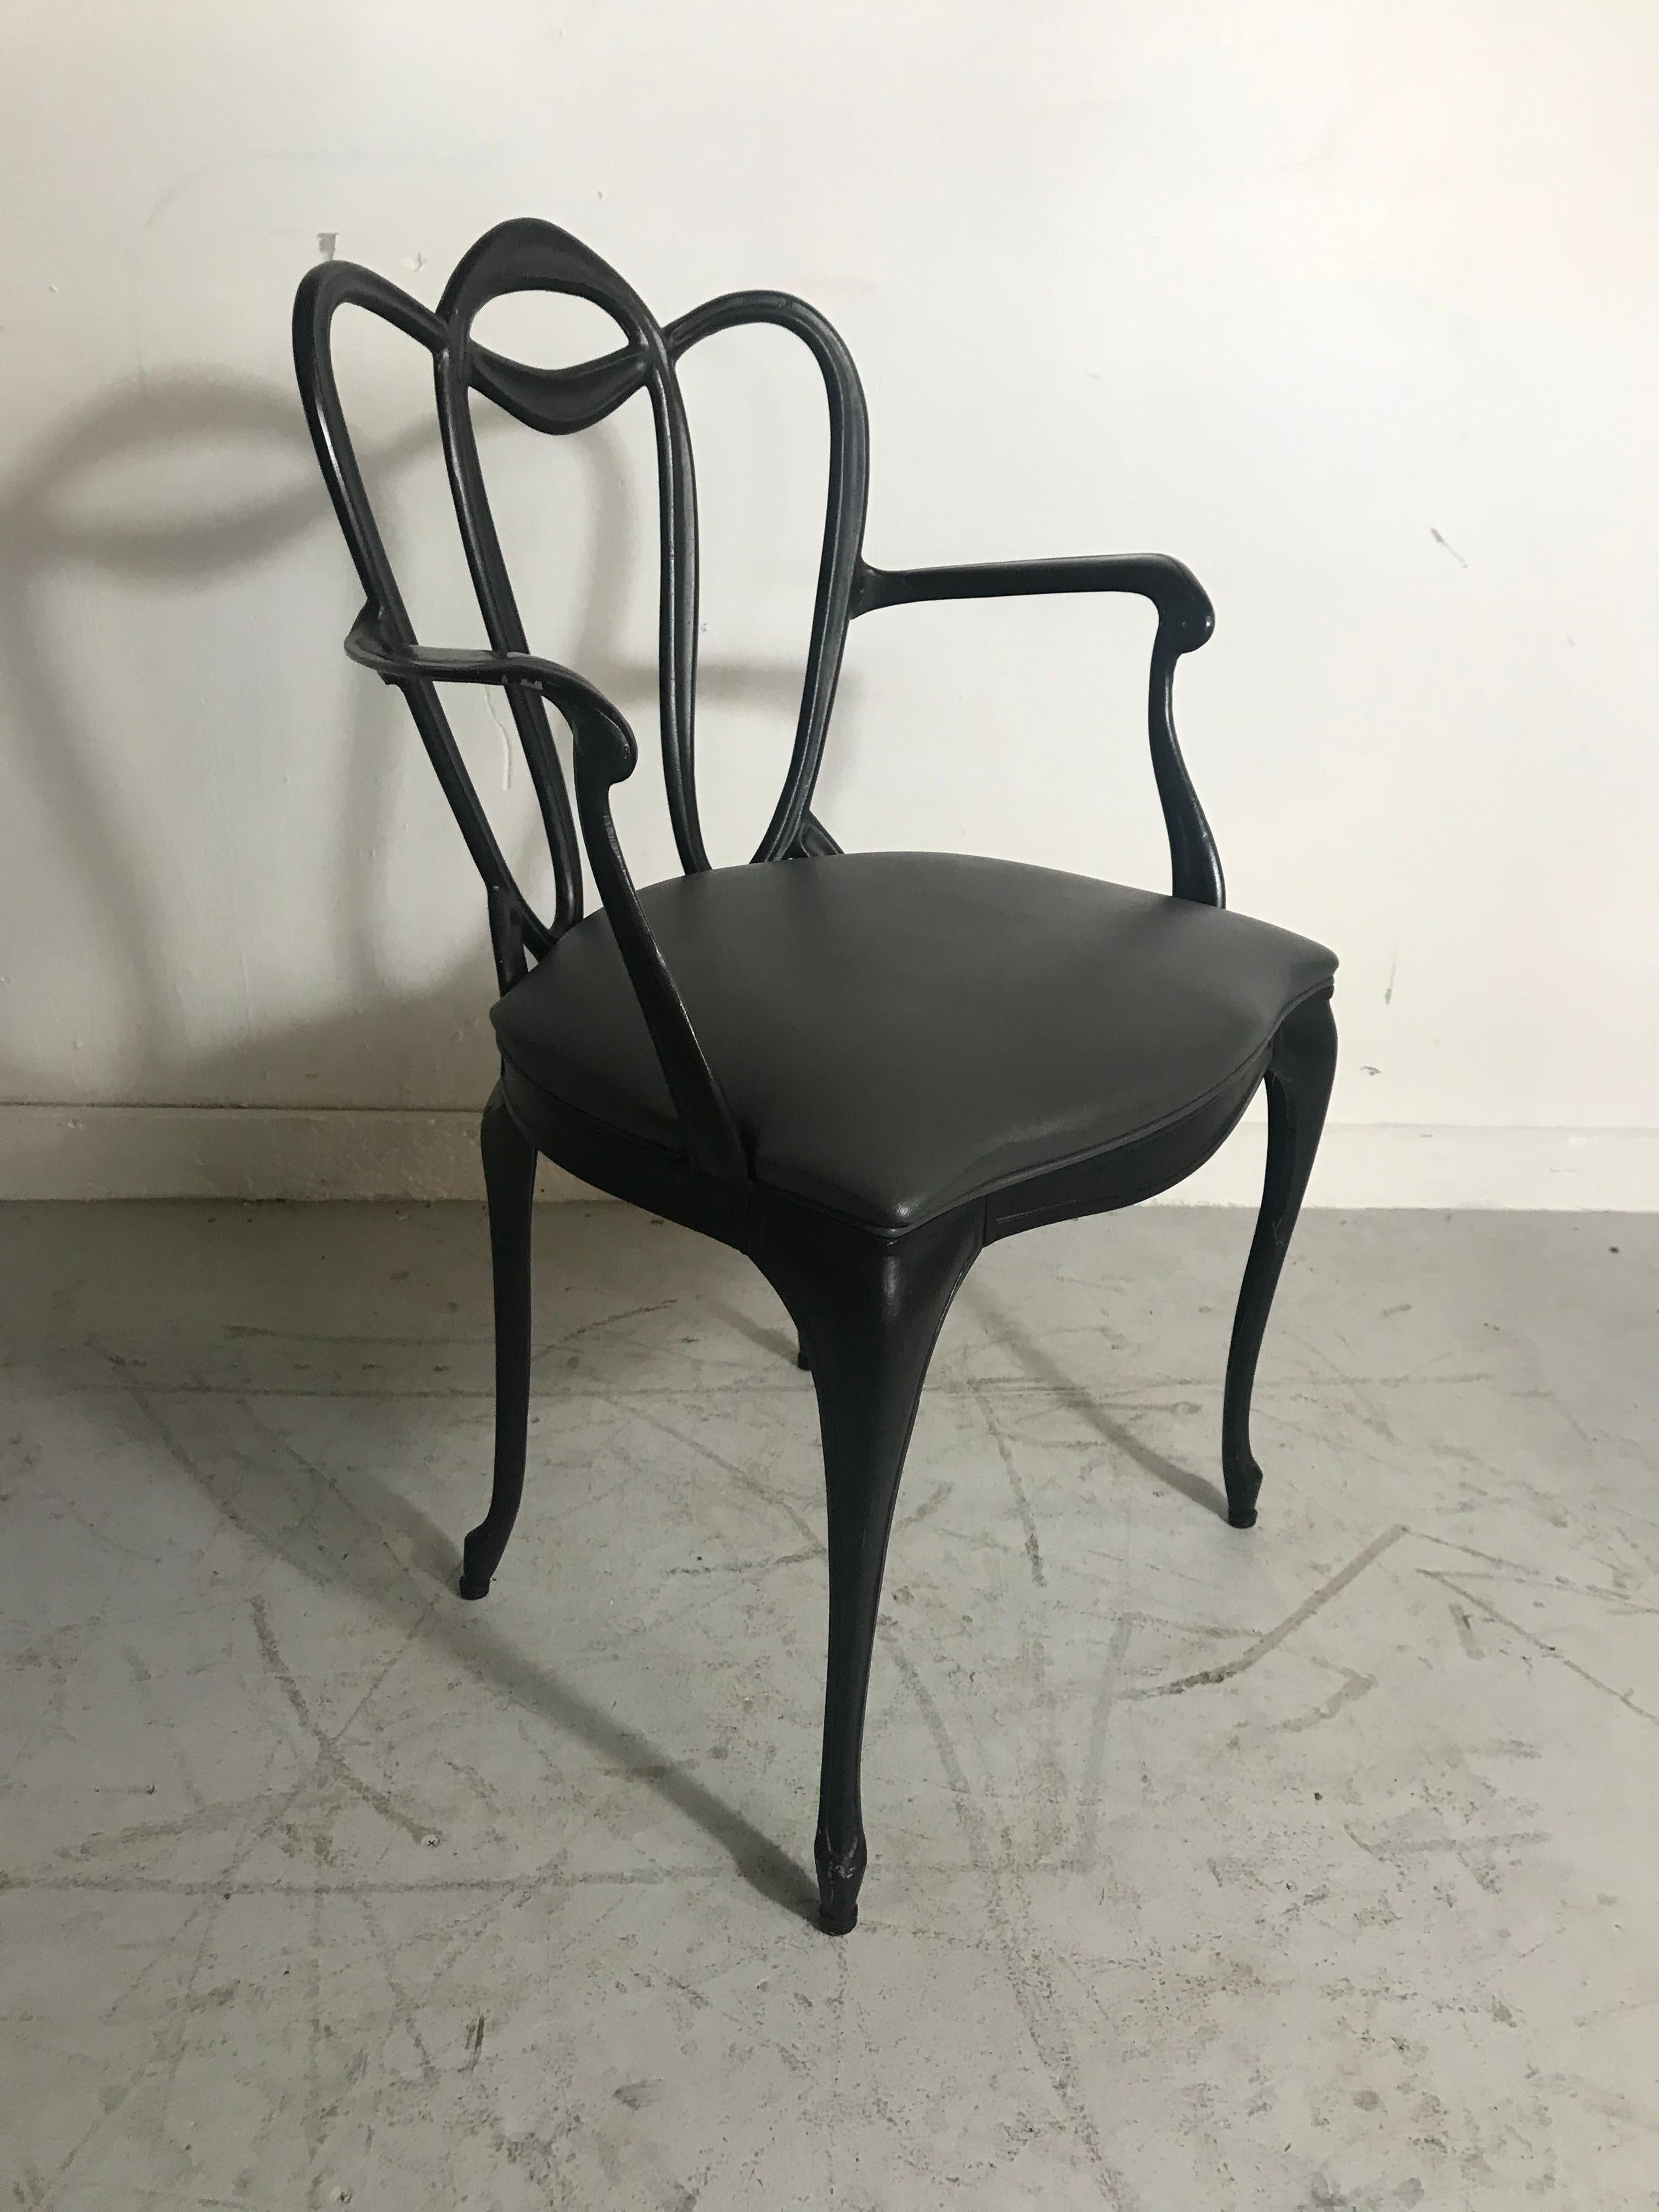 Art Nouveau style cast aluminum armchair by Crucible Products Corp. 1960, amazing design, extremely comfortable, retains original dark gray Naugahyde seat as well as original paper label, arm height 24.5